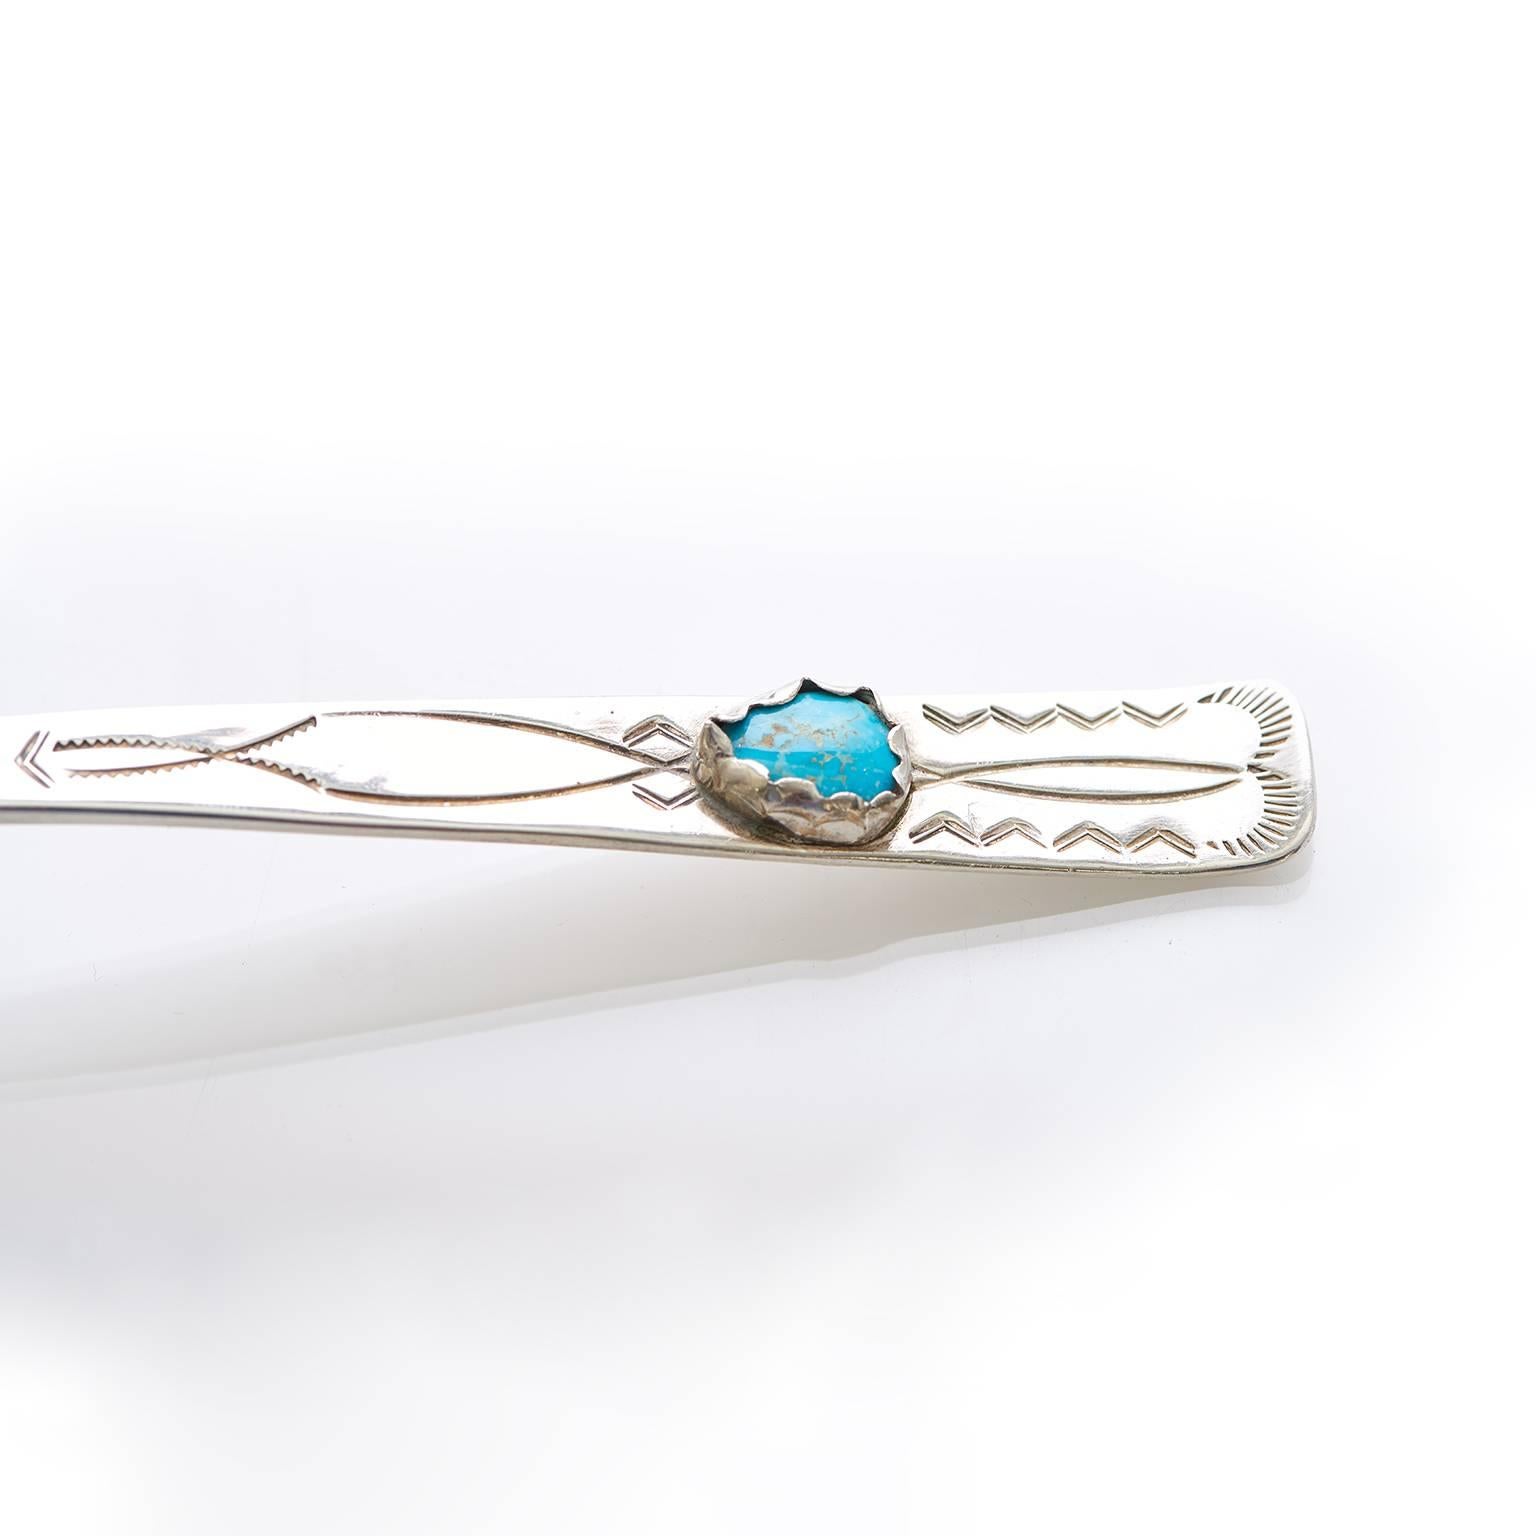 American Fifties Navajo Turquoise and Sterling Salad Set